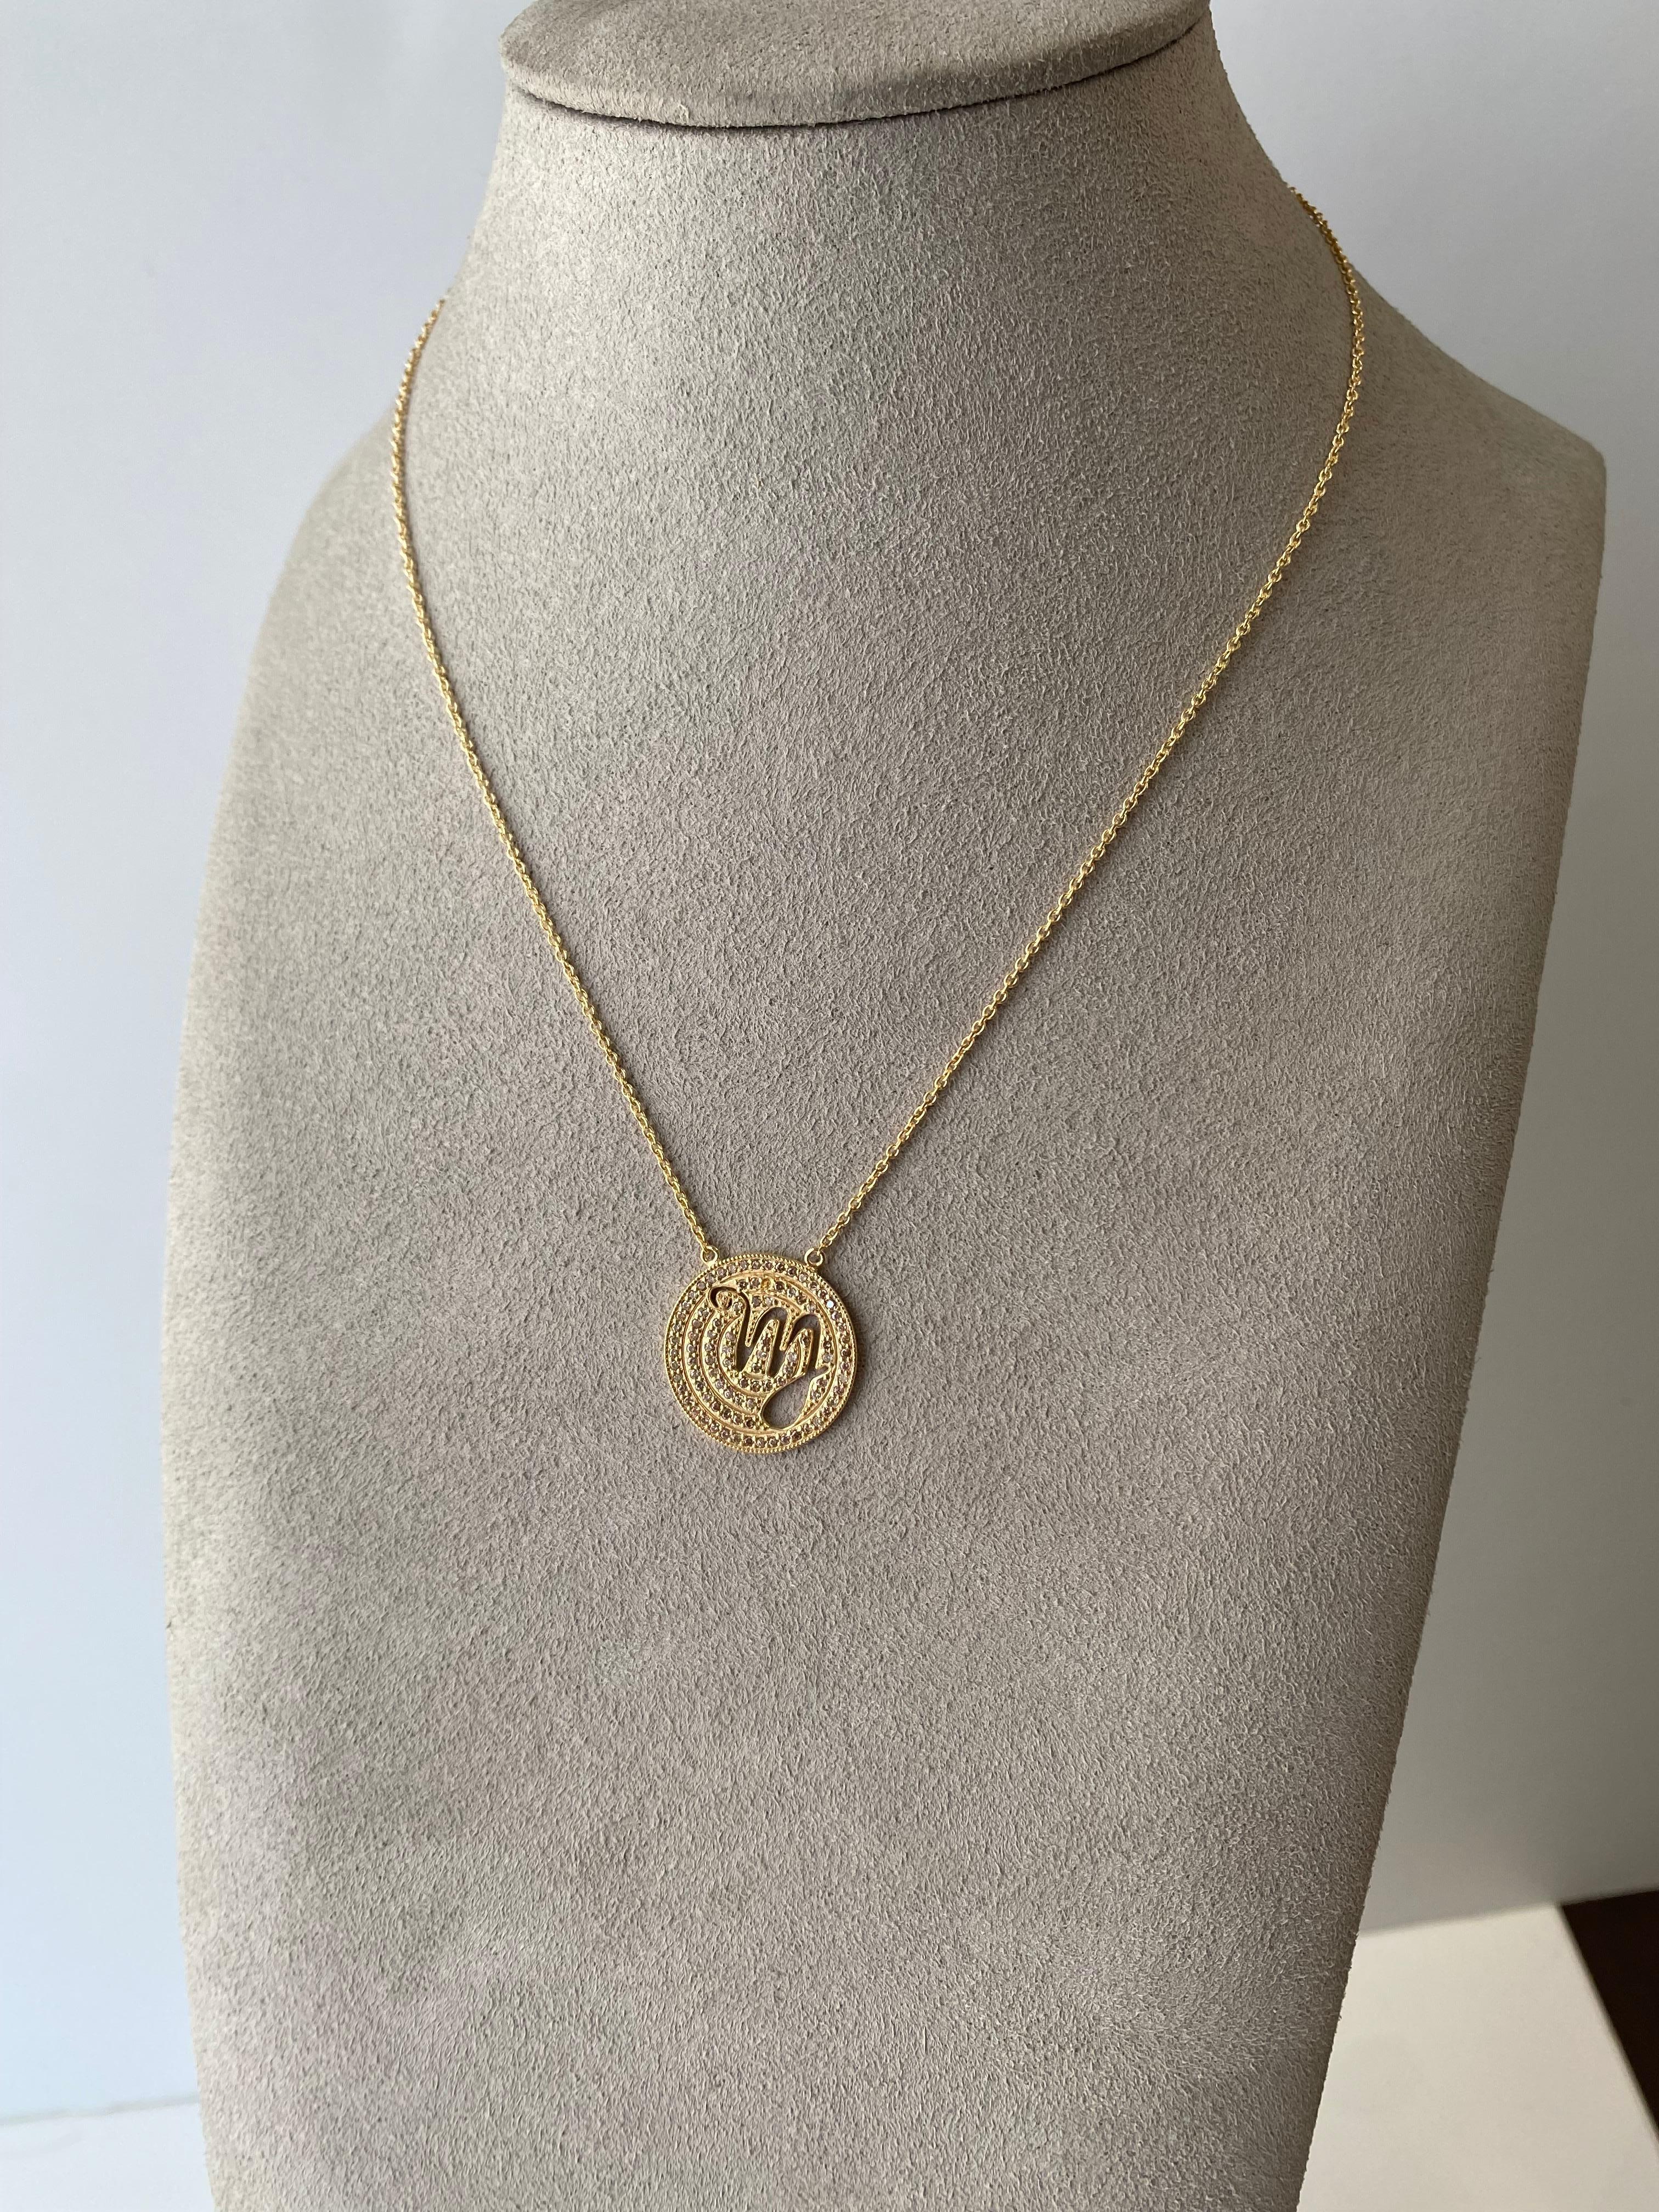 Zodiac Virgo 18 Karat Gold Plated Necklace Suneera In New Condition For Sale In Los Angeles, CA